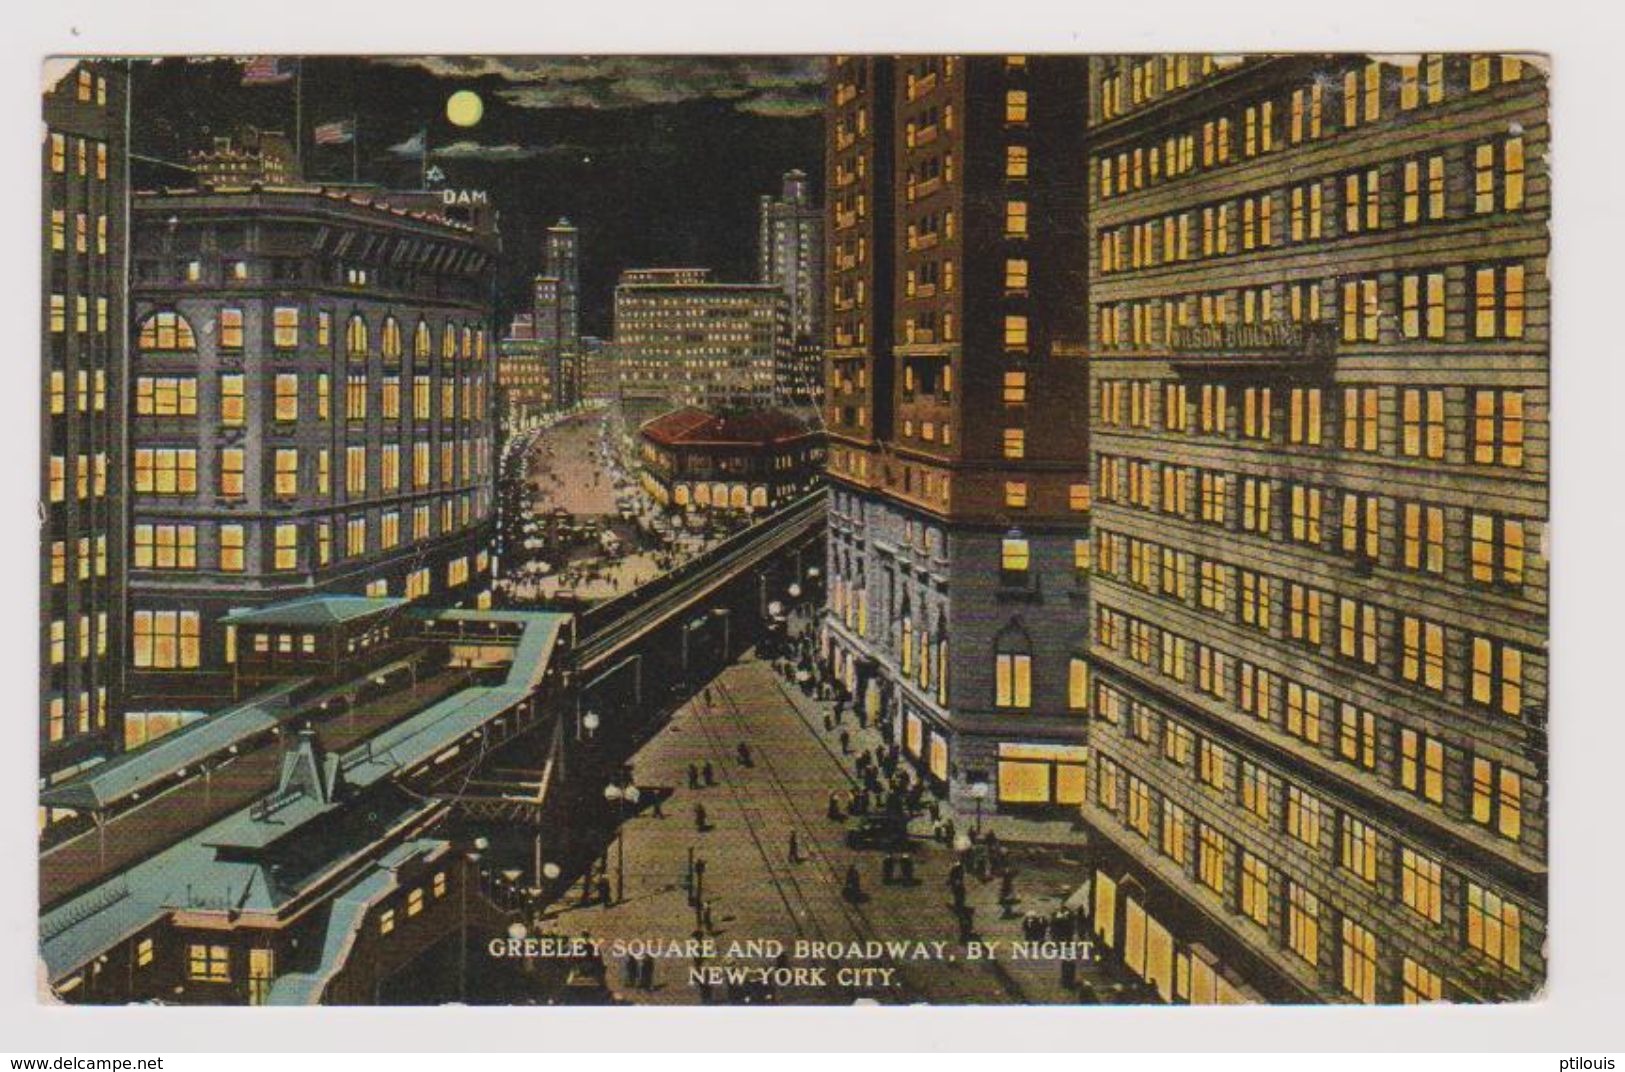 NEW YORK CITY - Greeley Square And Broadway, By Night - (H. Pinkelstein & Son) - Broadway